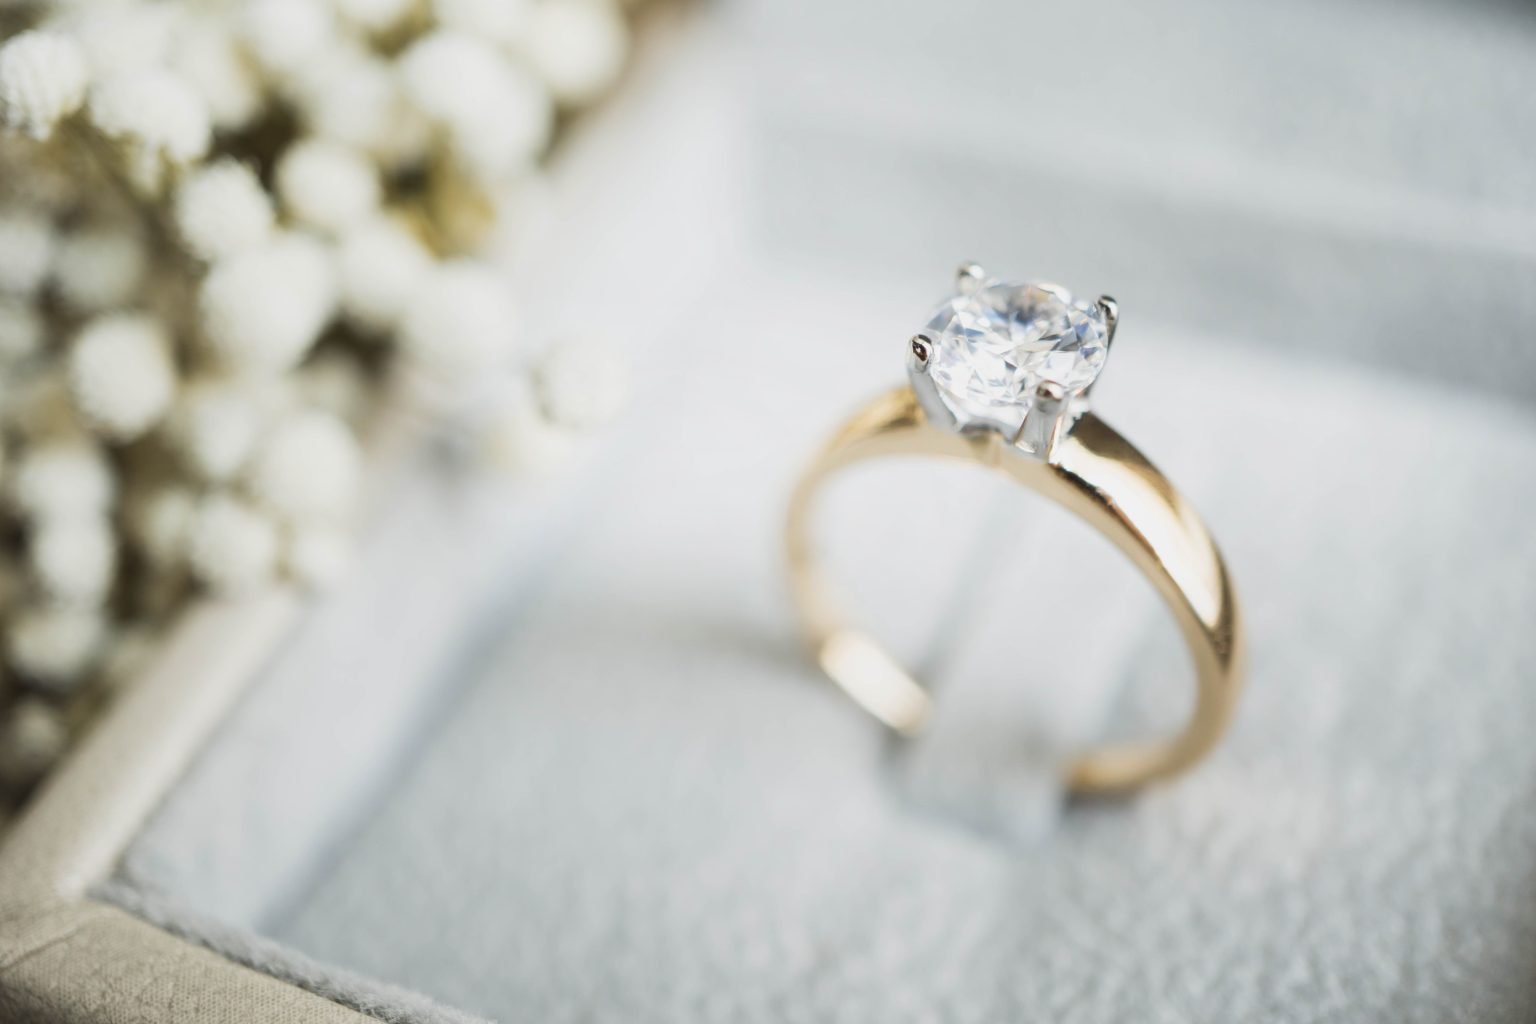 Engagement Rings - History and Styles | Pricescope